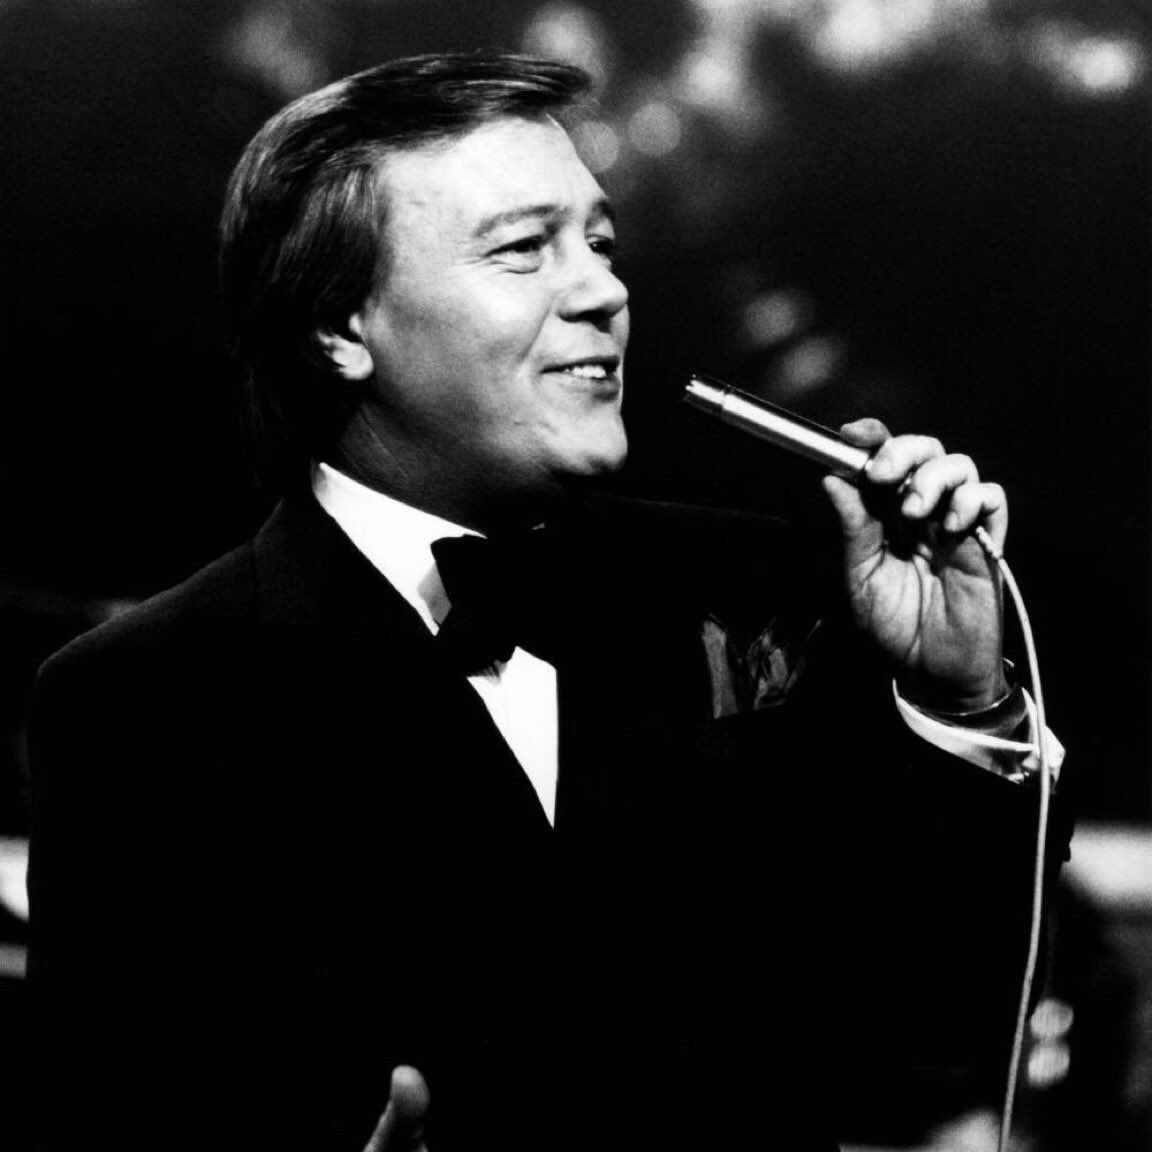 #MattMonro Let’s get some music up today by Matt Monro. The Man with the Golden Voice. Incredible beautiful singing baritone voice, The singer’s singer. Made some brilliant records. Born Free my favourite out of so many great records. Died 1985 age 54.